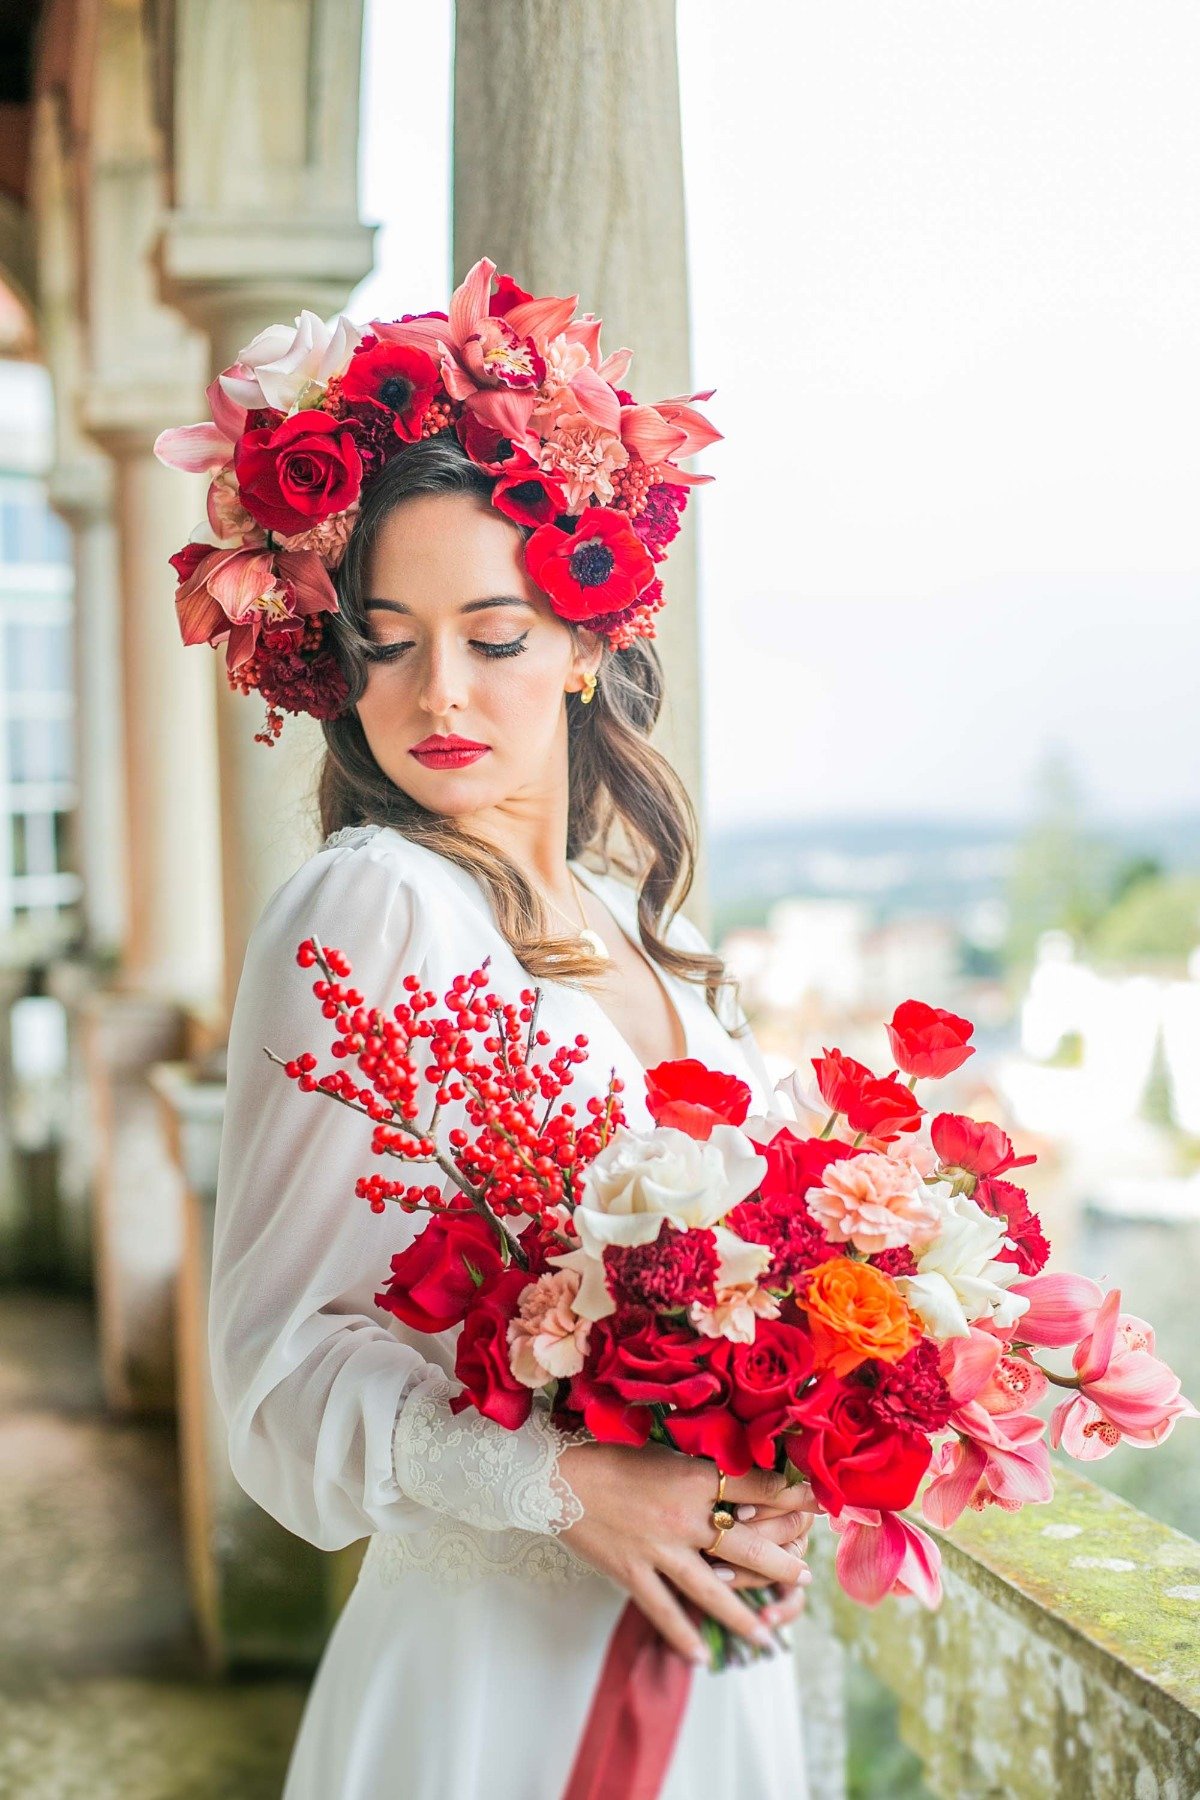 A Portugal Winter Wedding Inspiration Full Of Bright Bold Colors